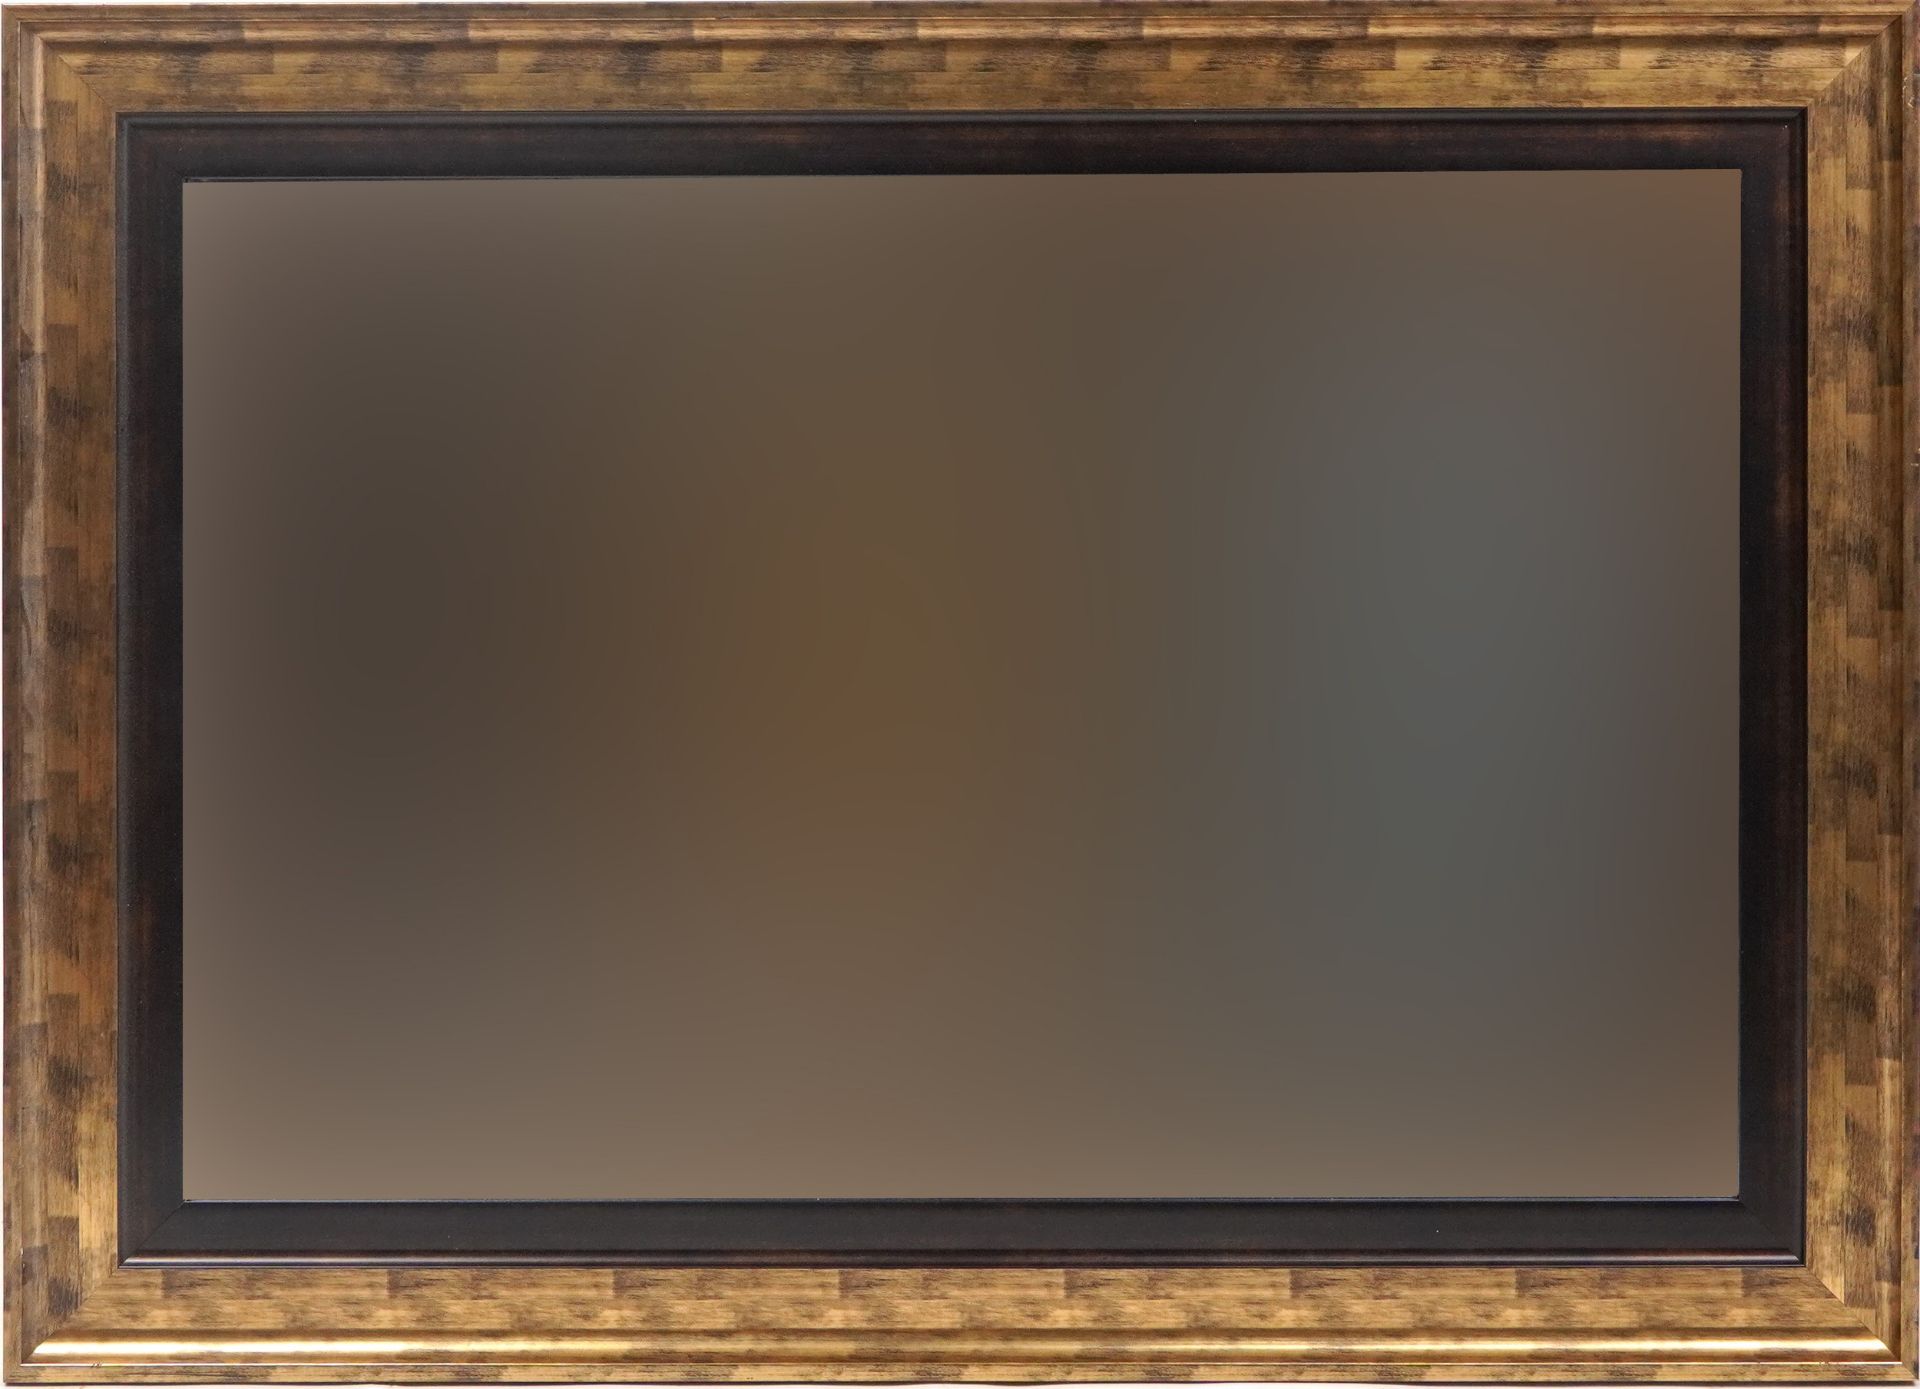 Large contemporary rectangular gilt framed mirror with bevelled glass, 110cm x 80cm